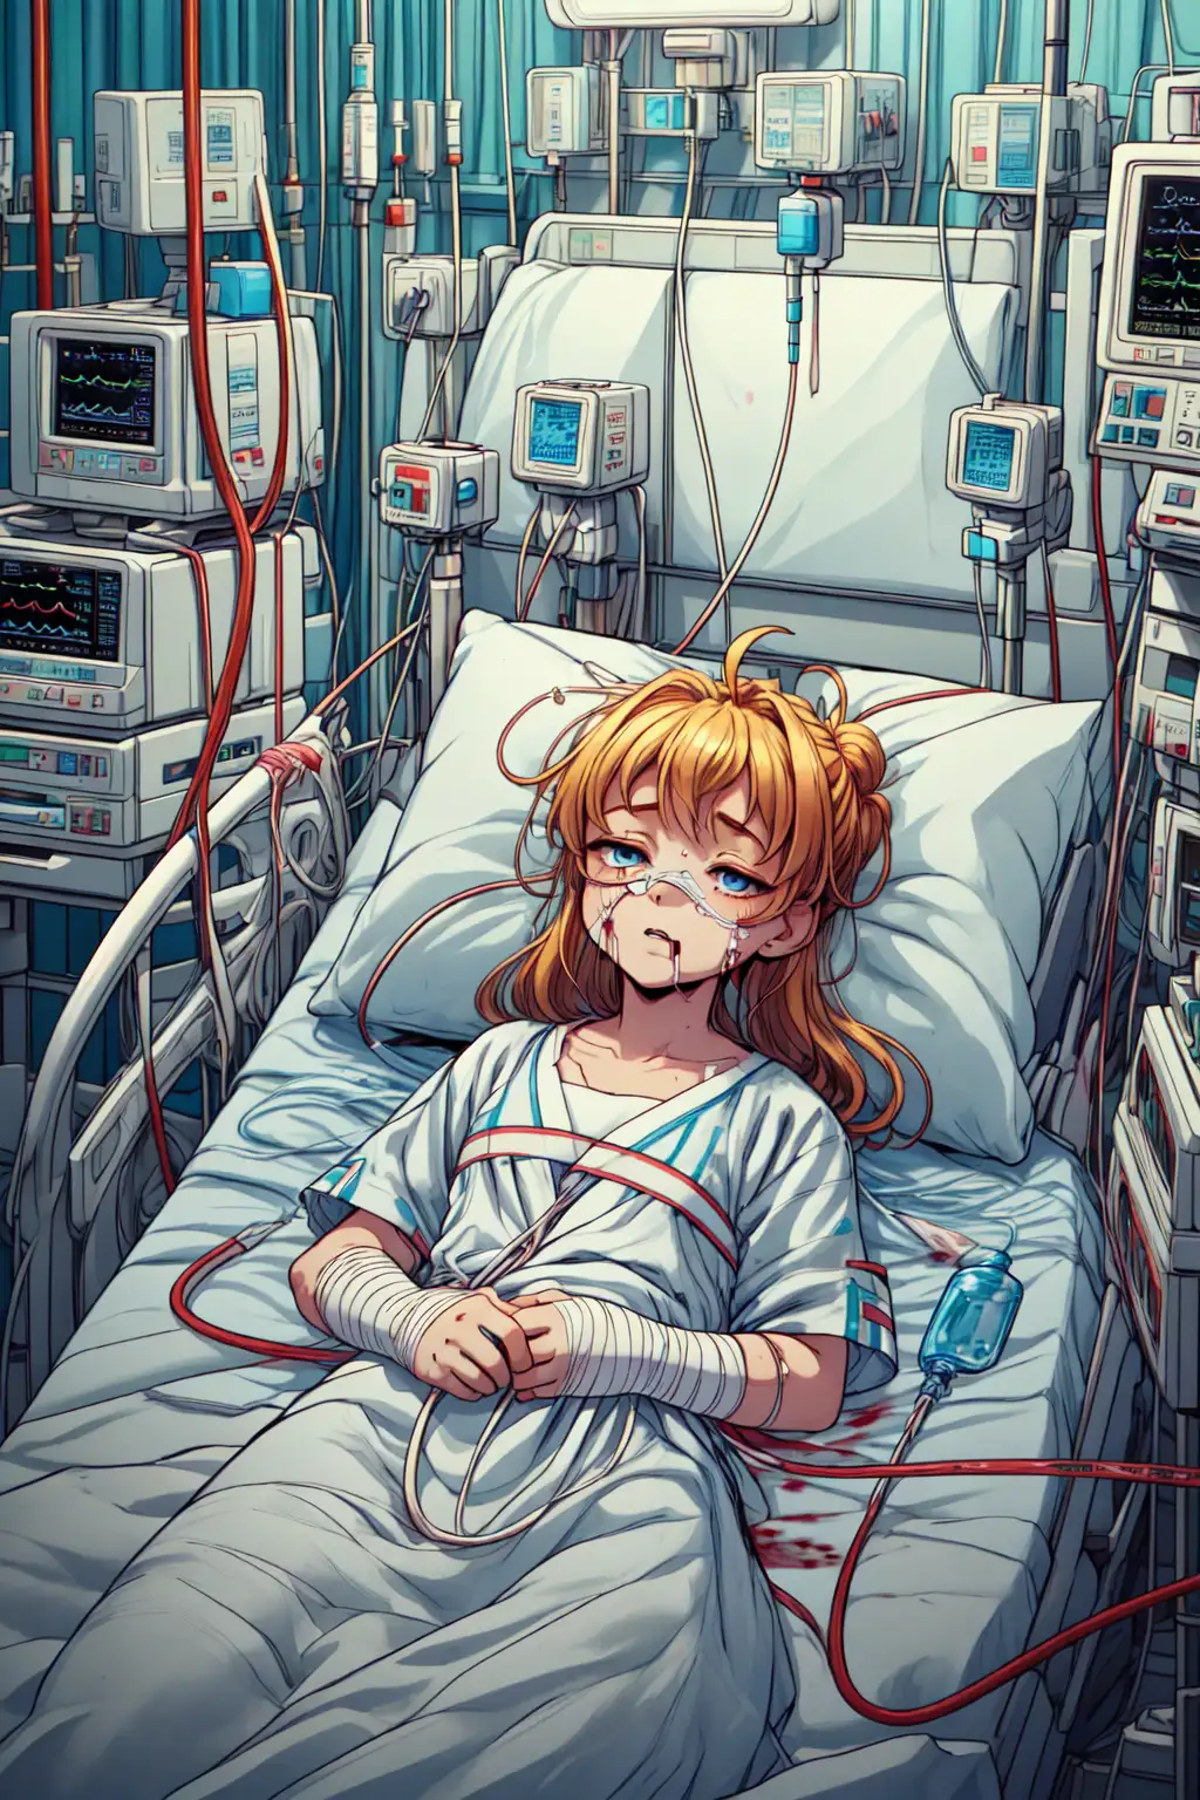 e-patient image by slime77744784